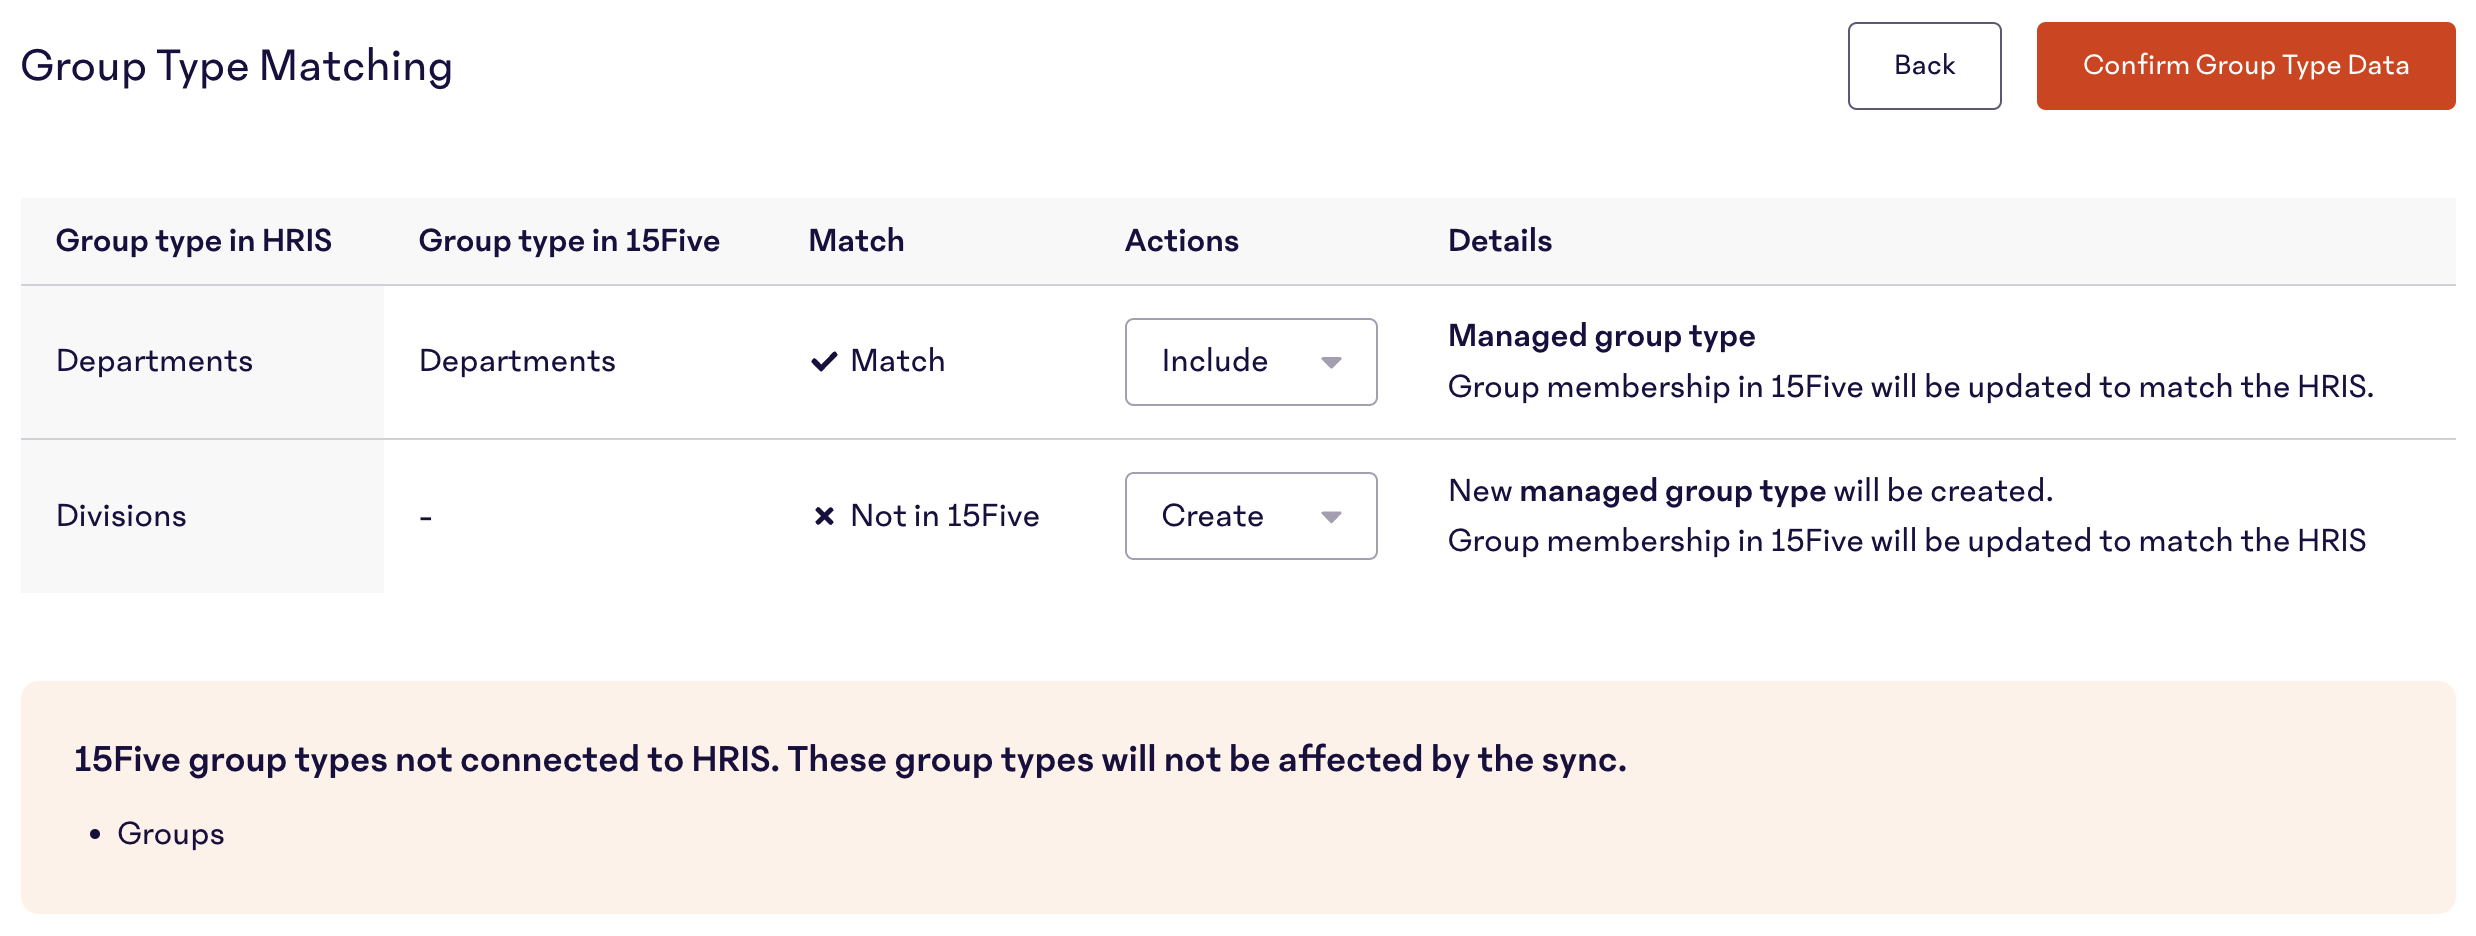 Group-Type-Matching.png